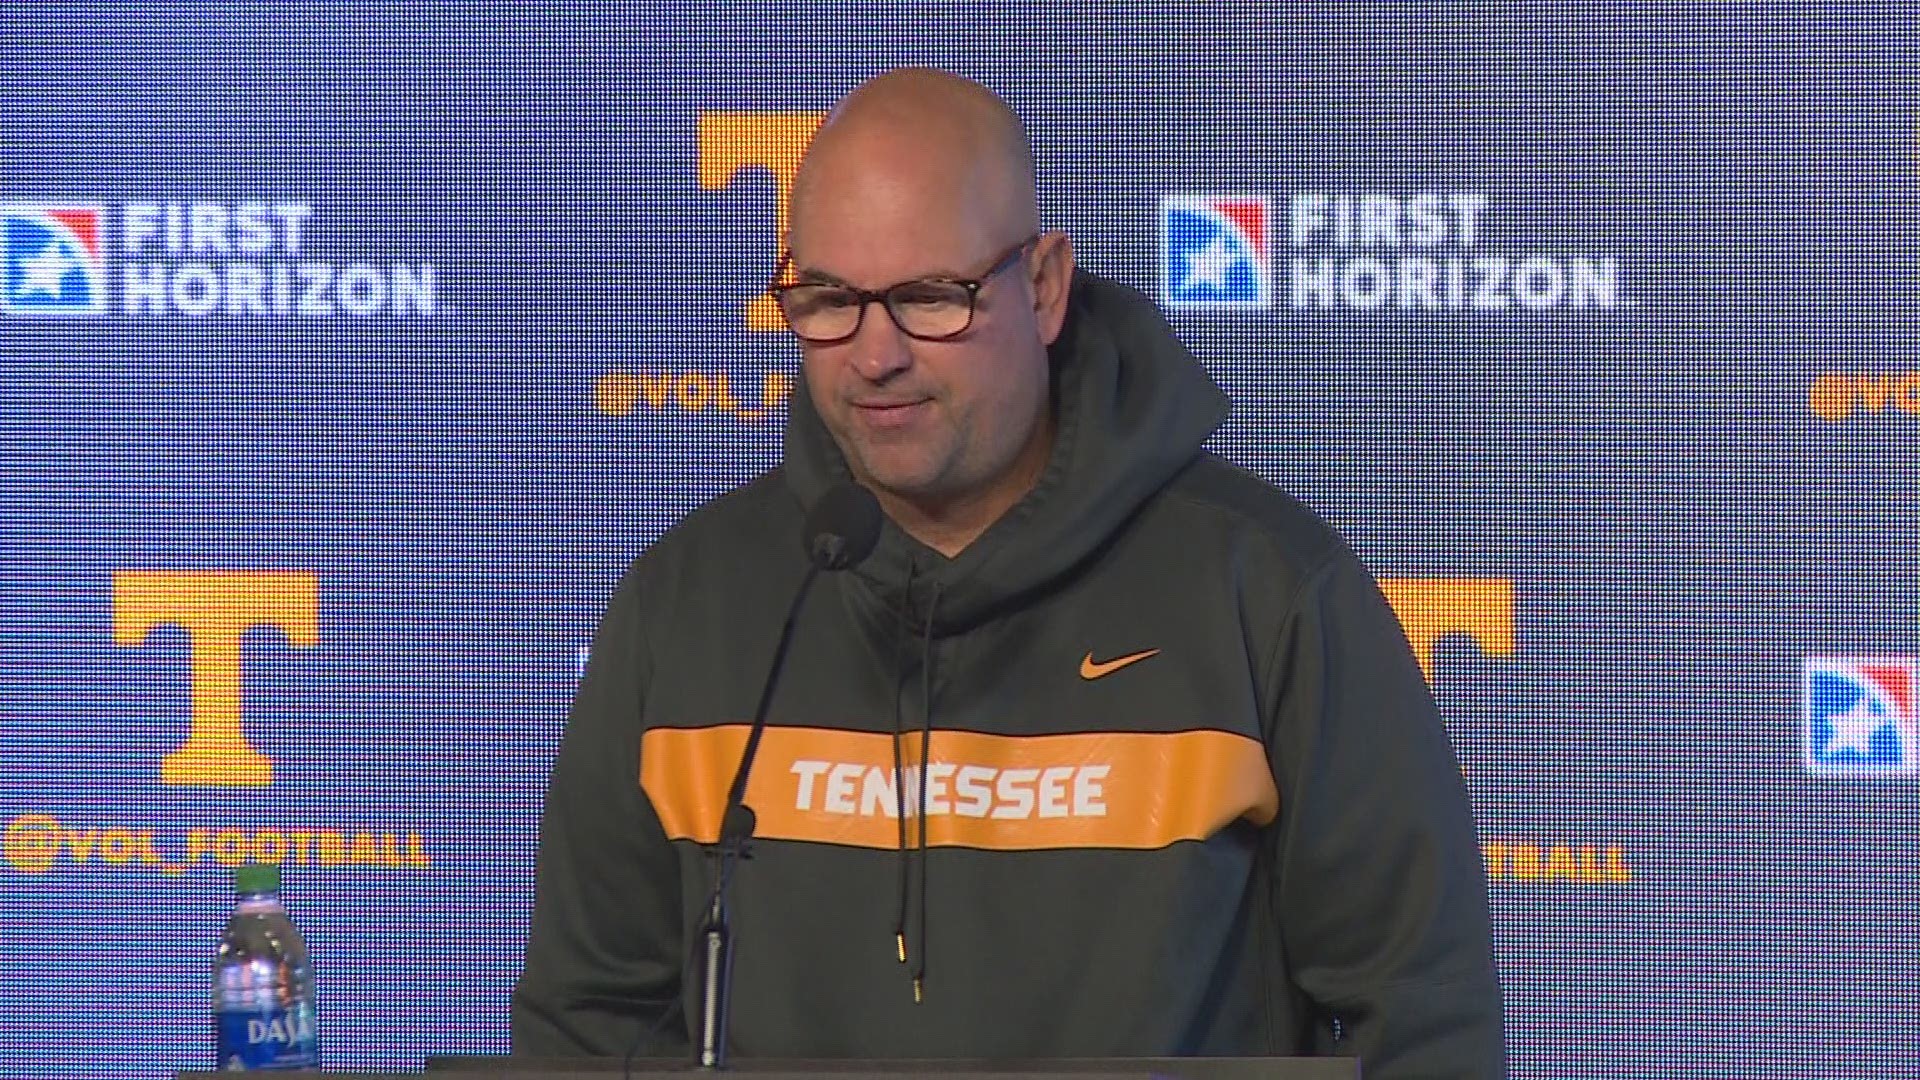 The Vols are bowl eligible after beating Missouri on the road and can finish the regular season with a 7-5 record if they can beat Vanderbilt on Saturday.